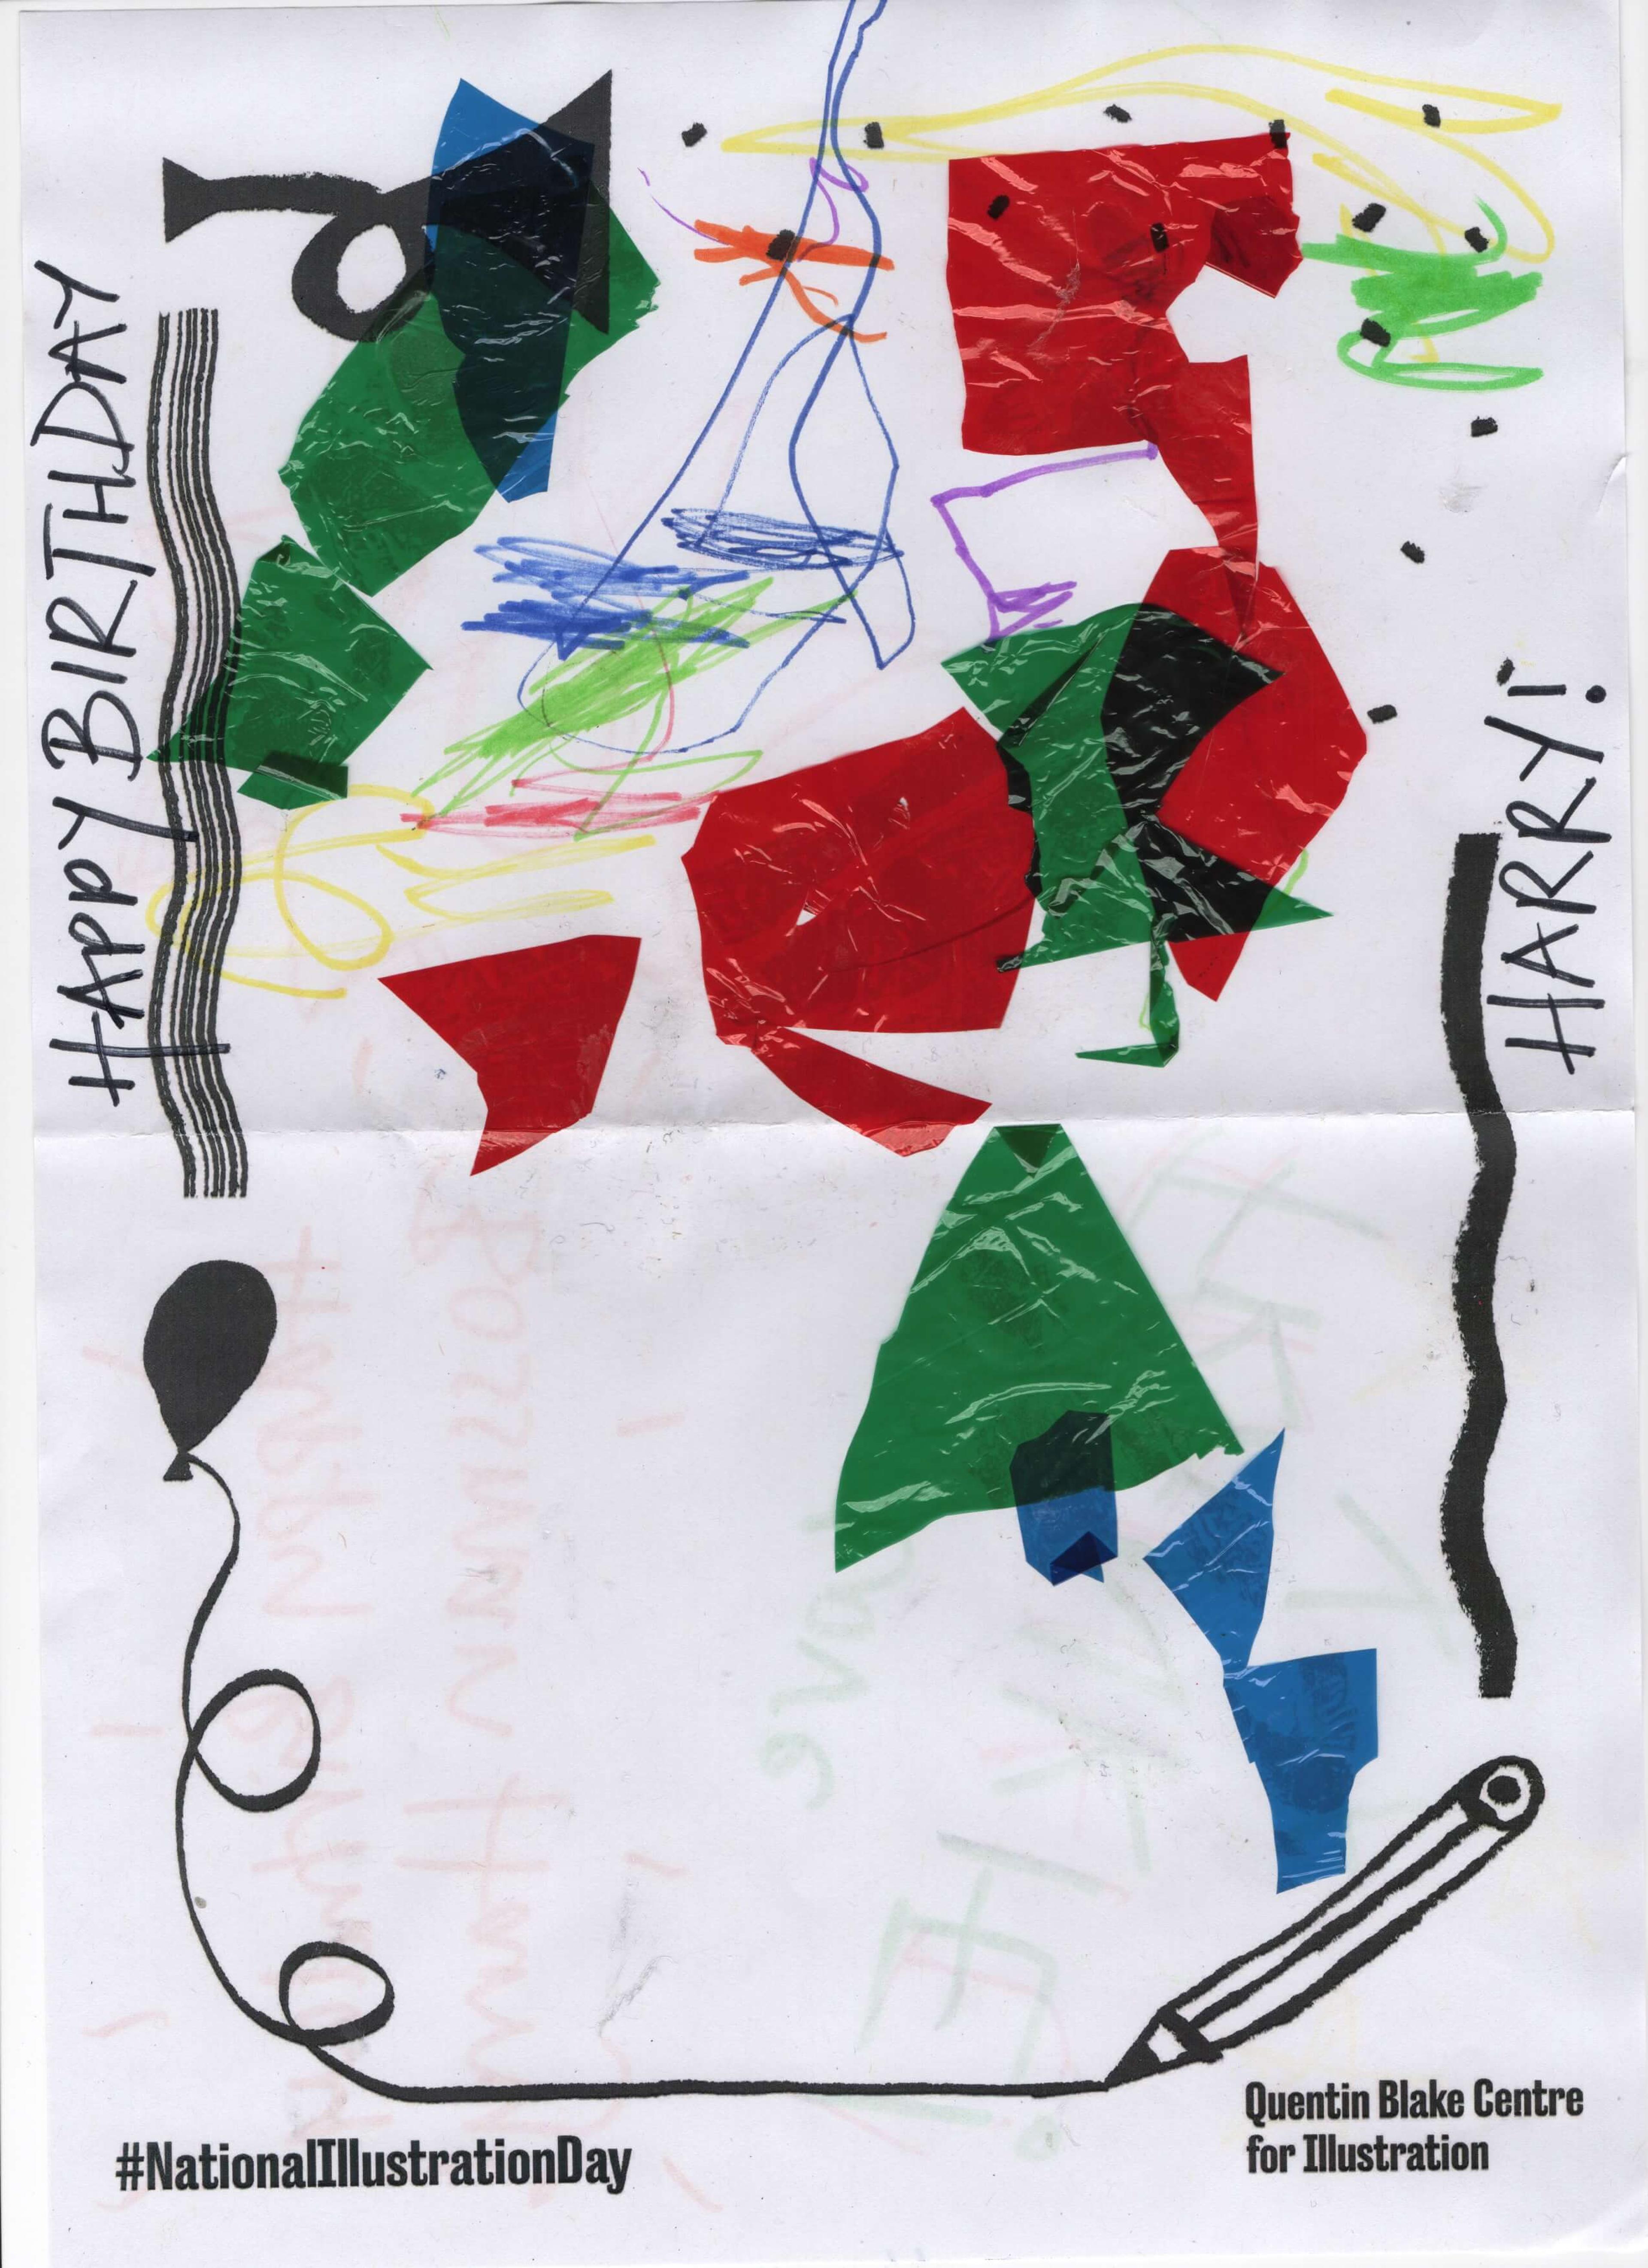 Abstract red, green and blue cellophane shapes with the words "Happy Birthday Harry!" written in black marker pen.